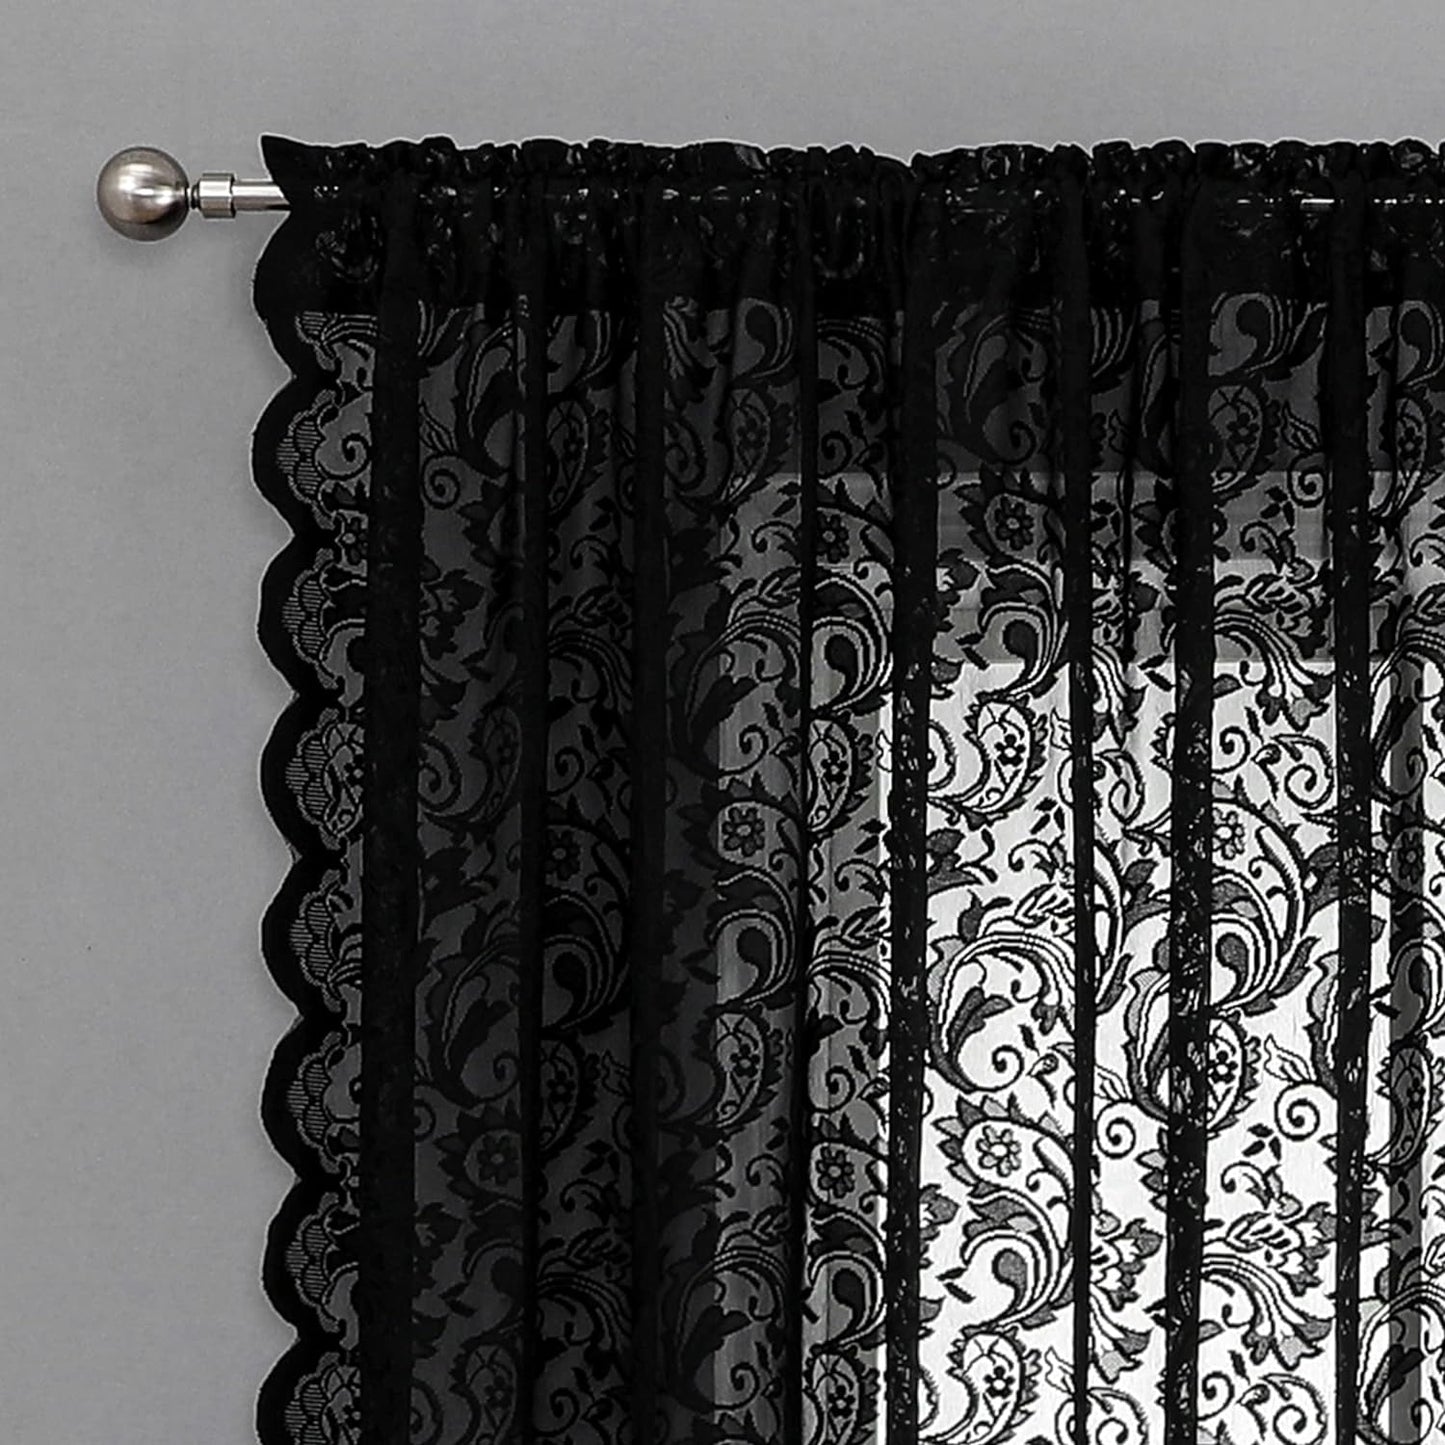 Black Sheer Lace Curtains 84 Inch Vintage Floral Sheer Gothic Curtain Panels for Living Room Bedroom Luxury Light Filtering Drapes Black Window Treatment Sets Rod Pocket 2 Panels 54" Wx84 L  Bujasso   